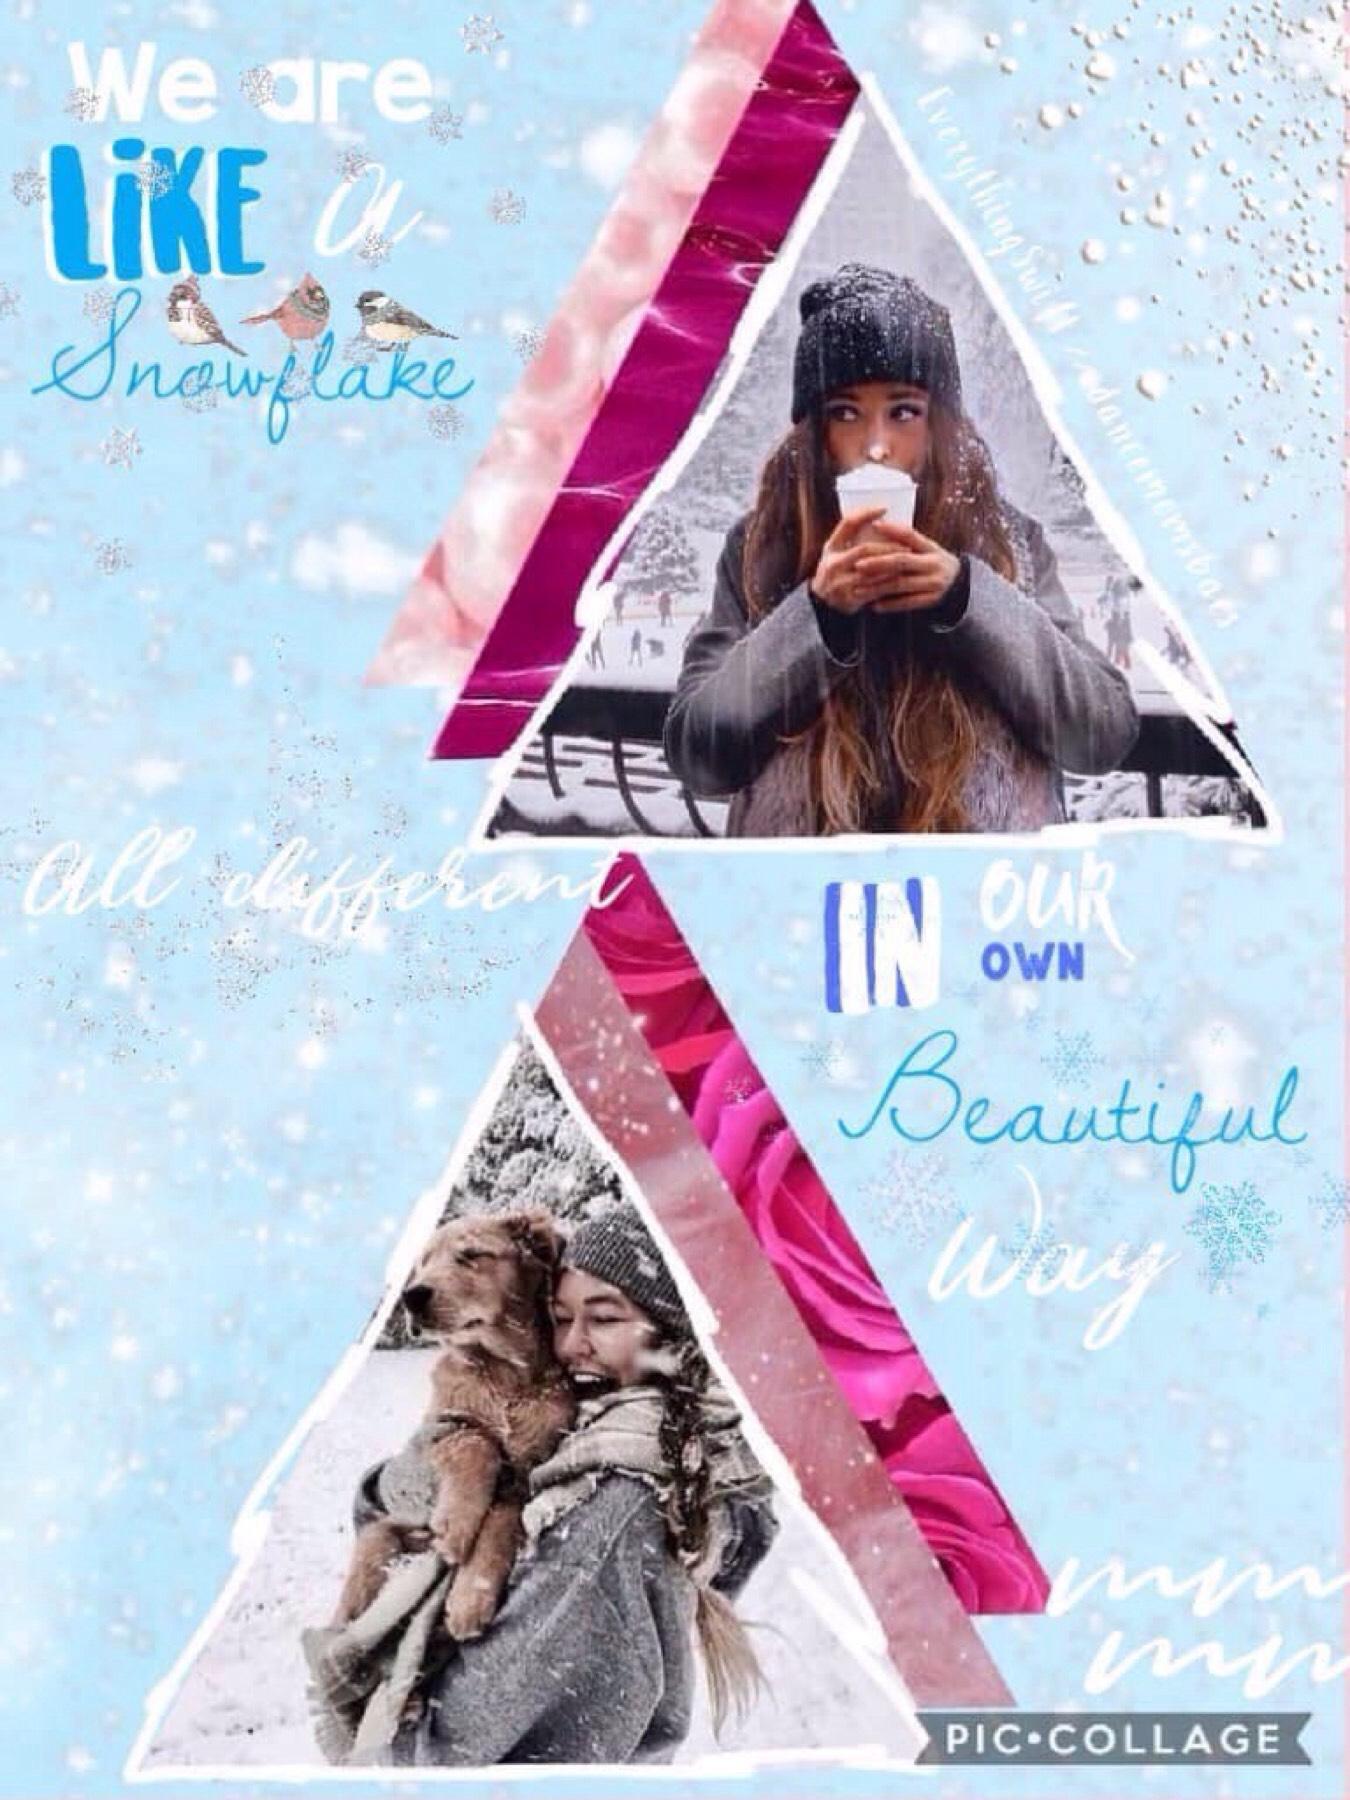 Collab with the always amazing dancemomsbae! My 1st winter collage! ❄️ Tap! 💕
QOTD: What is you favorite kind of hot cocoa? ☕️
AOTD: White chocolate hot cocoa! 